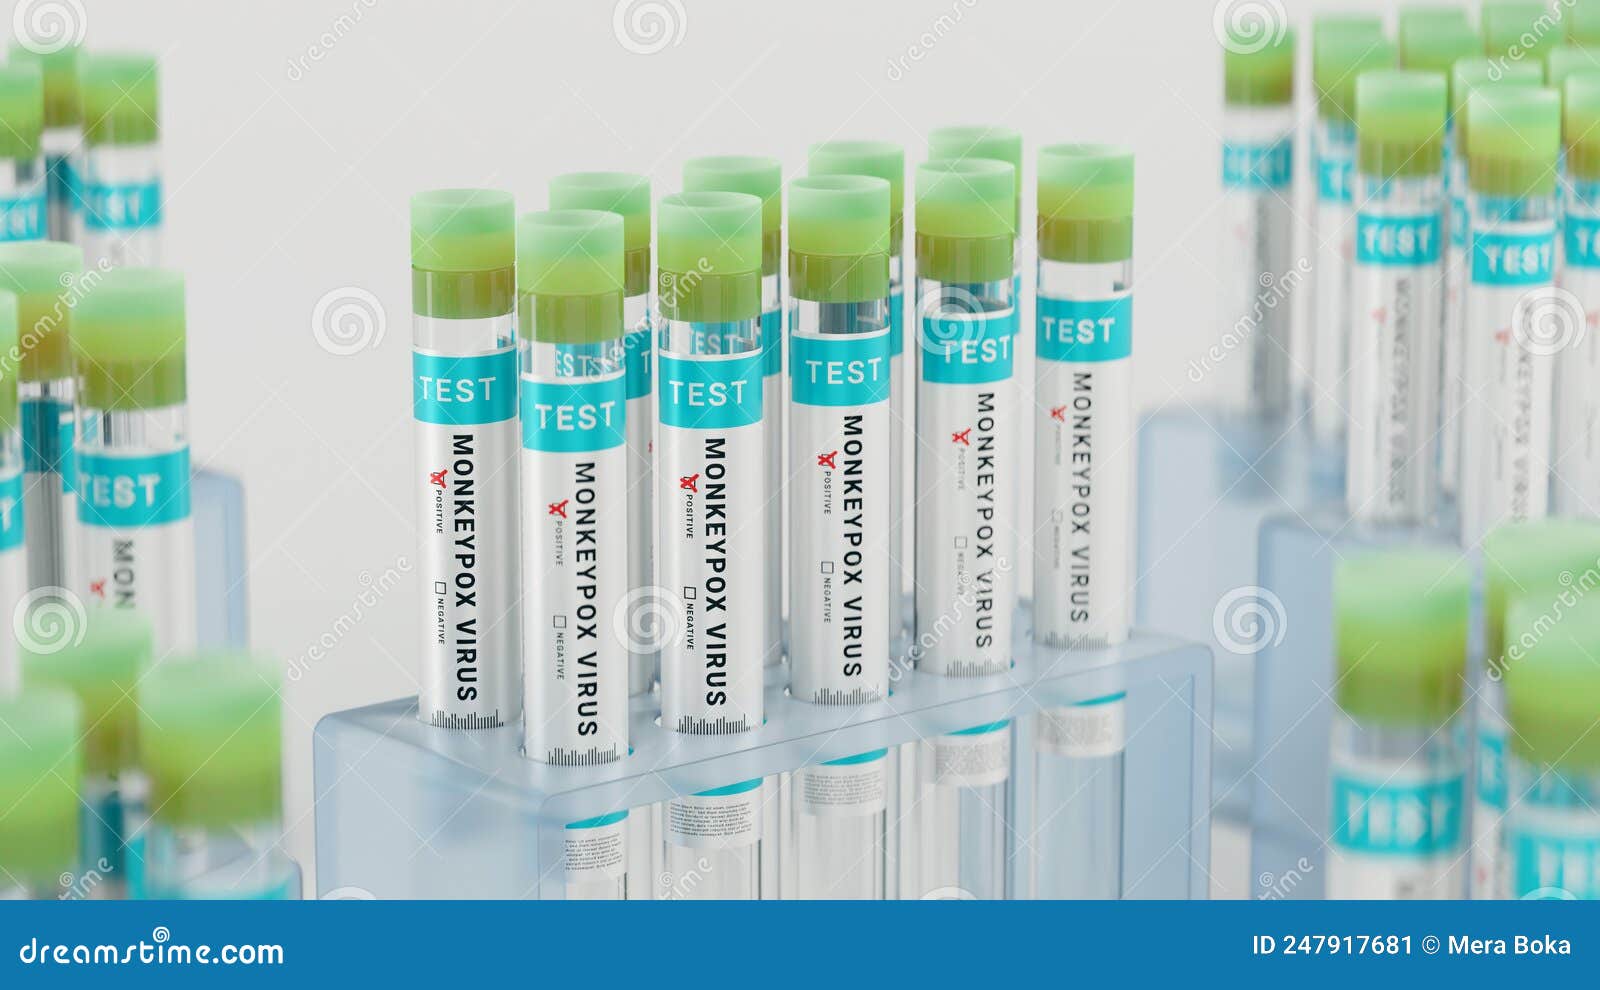 monkeypox virus test tubes in a vial rack in a healthcare laboratory